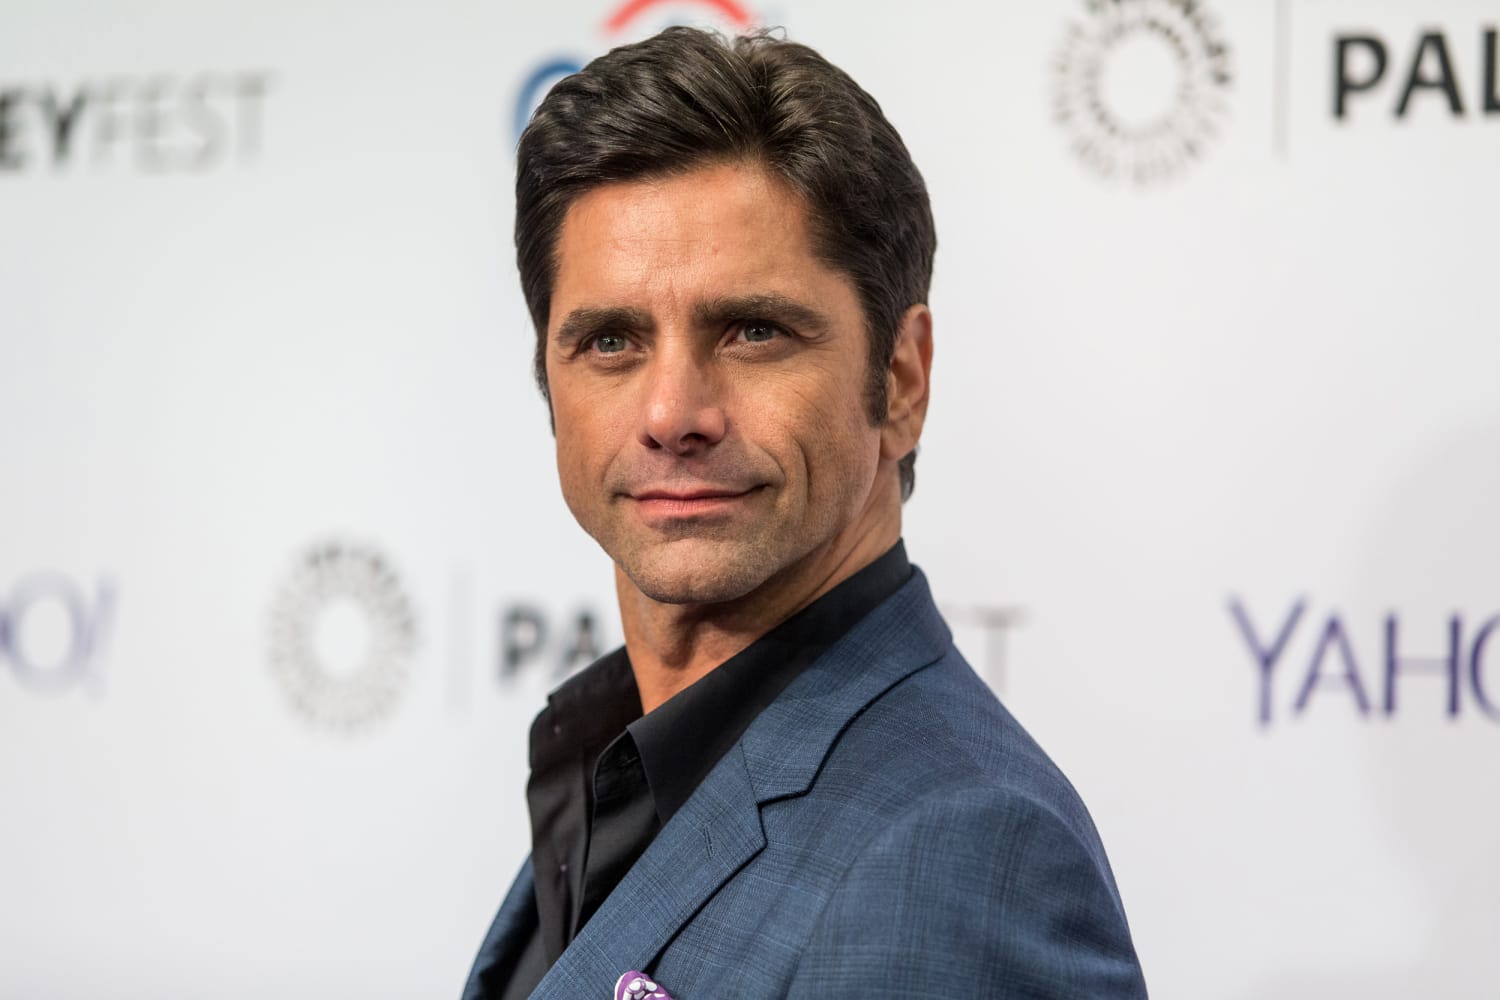 John Stamos Sentenced to Three Years' Probation in DUI Case.